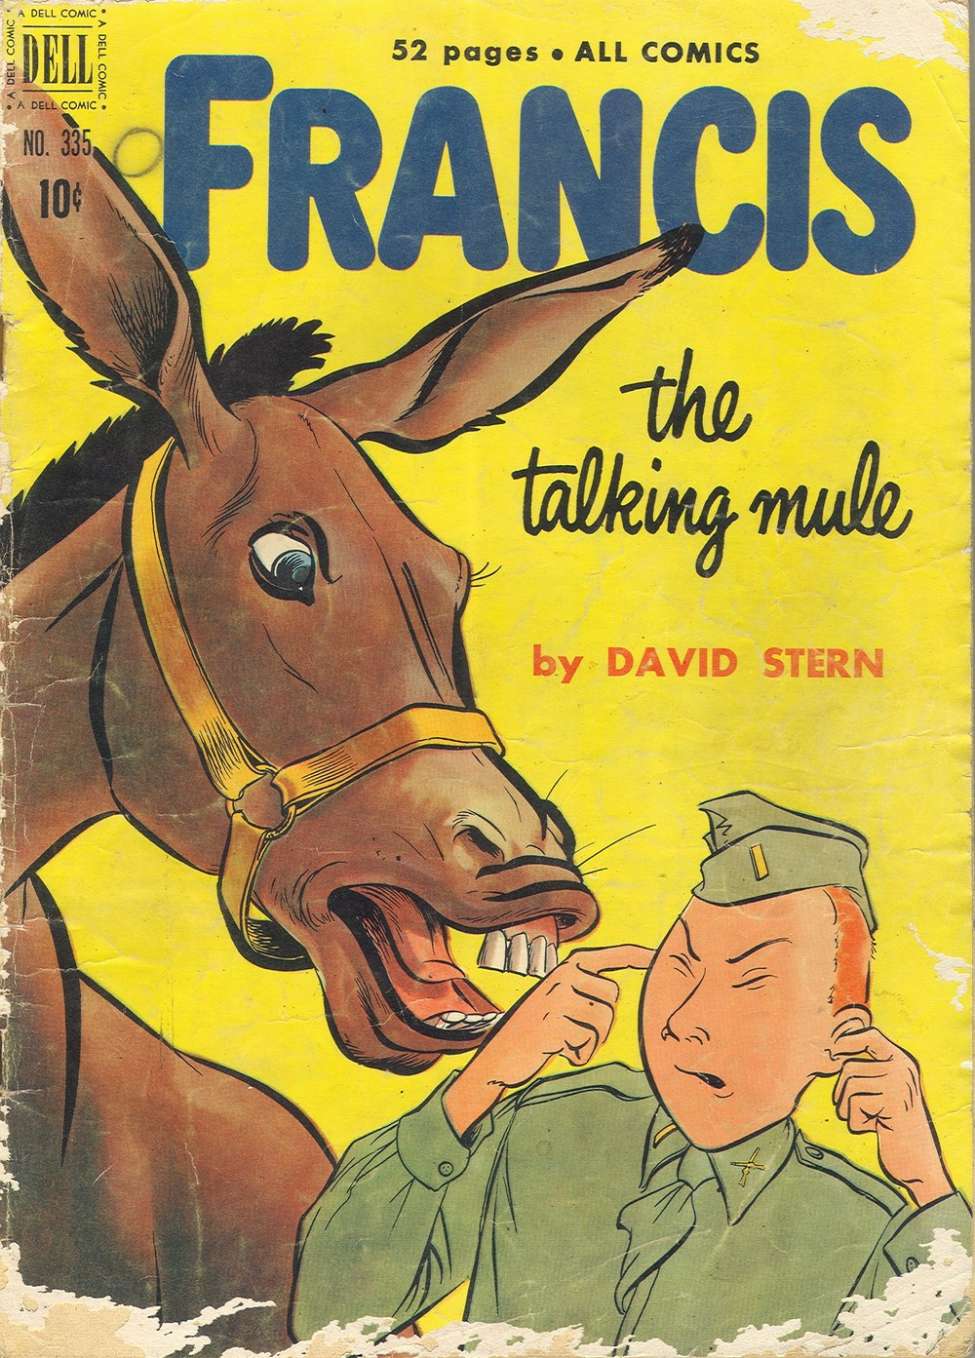 Book Cover For 0335 - Francis, The Famous Talking Mule